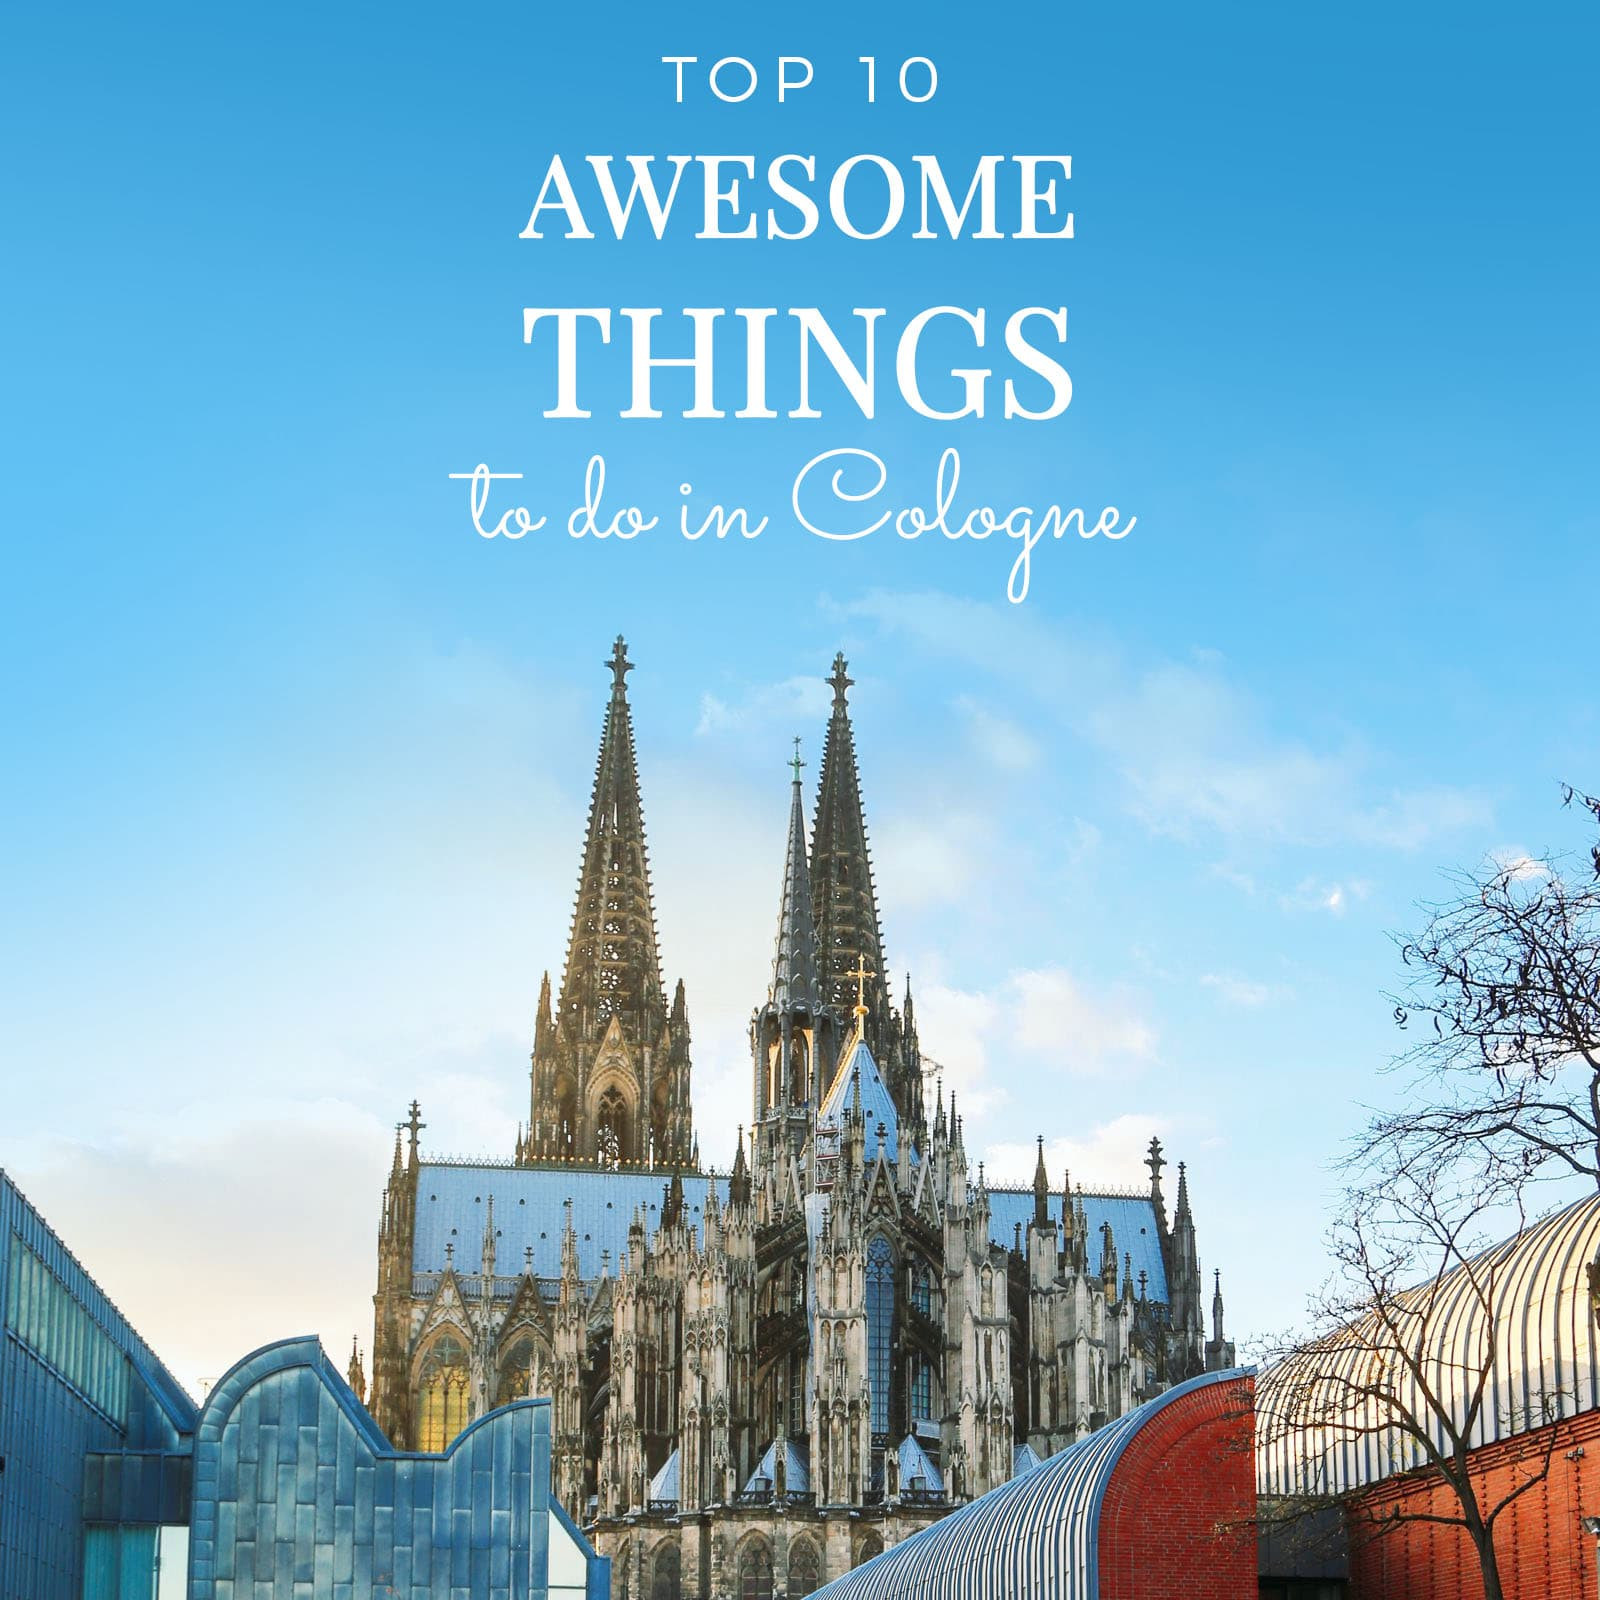 10 awesome things to do in Cologne